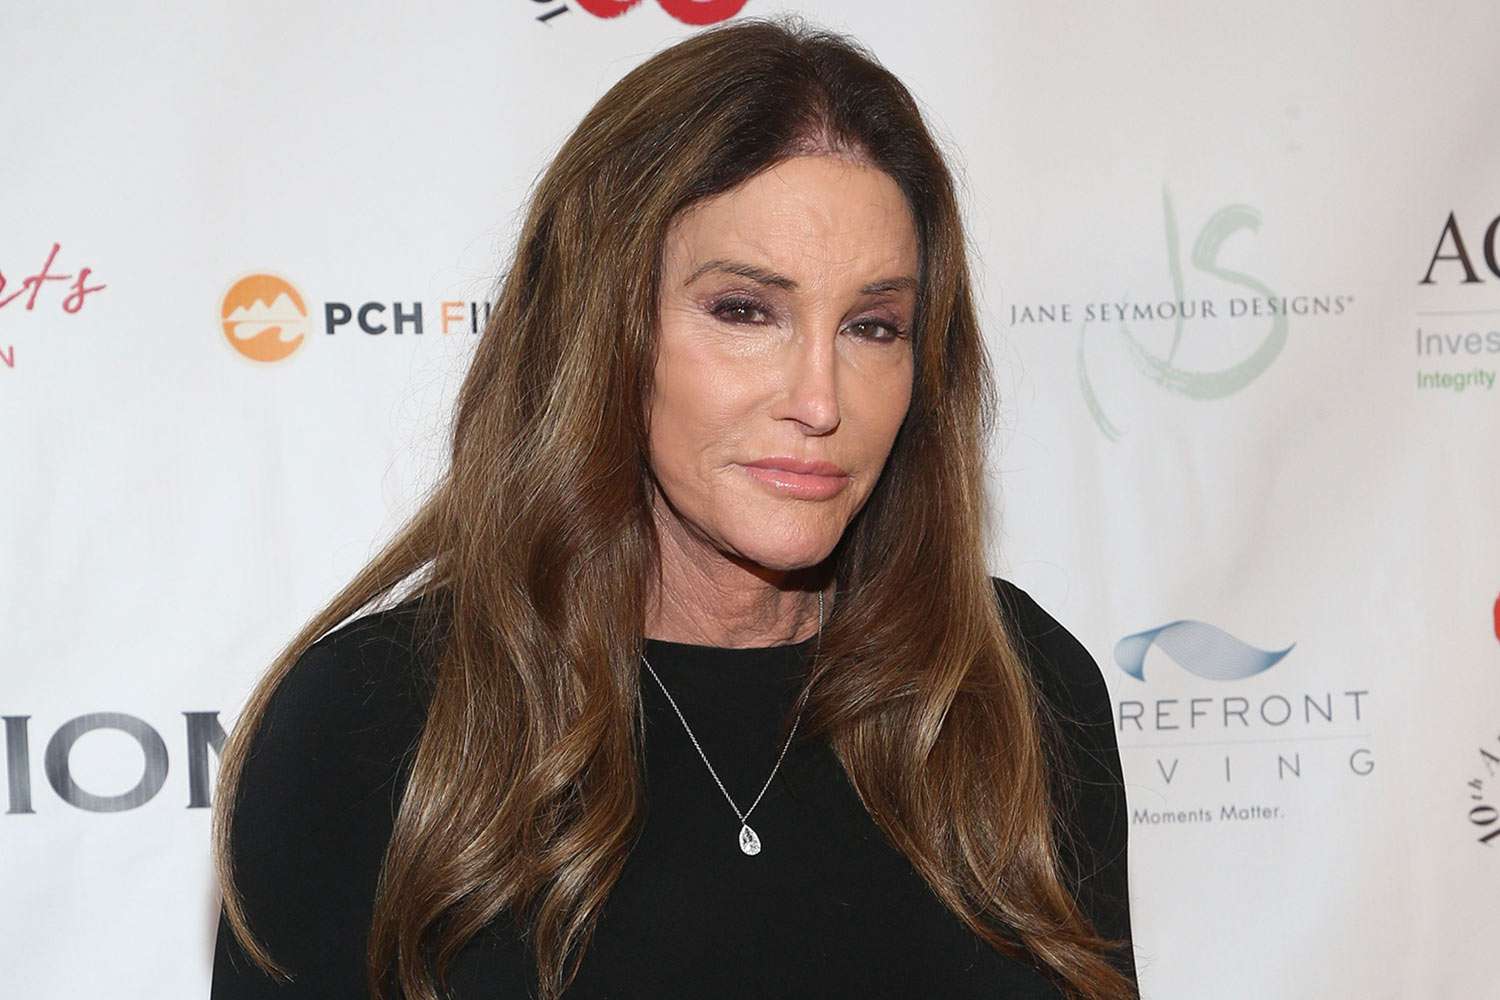 Caitlyn Jenner on Needing to Be Herself